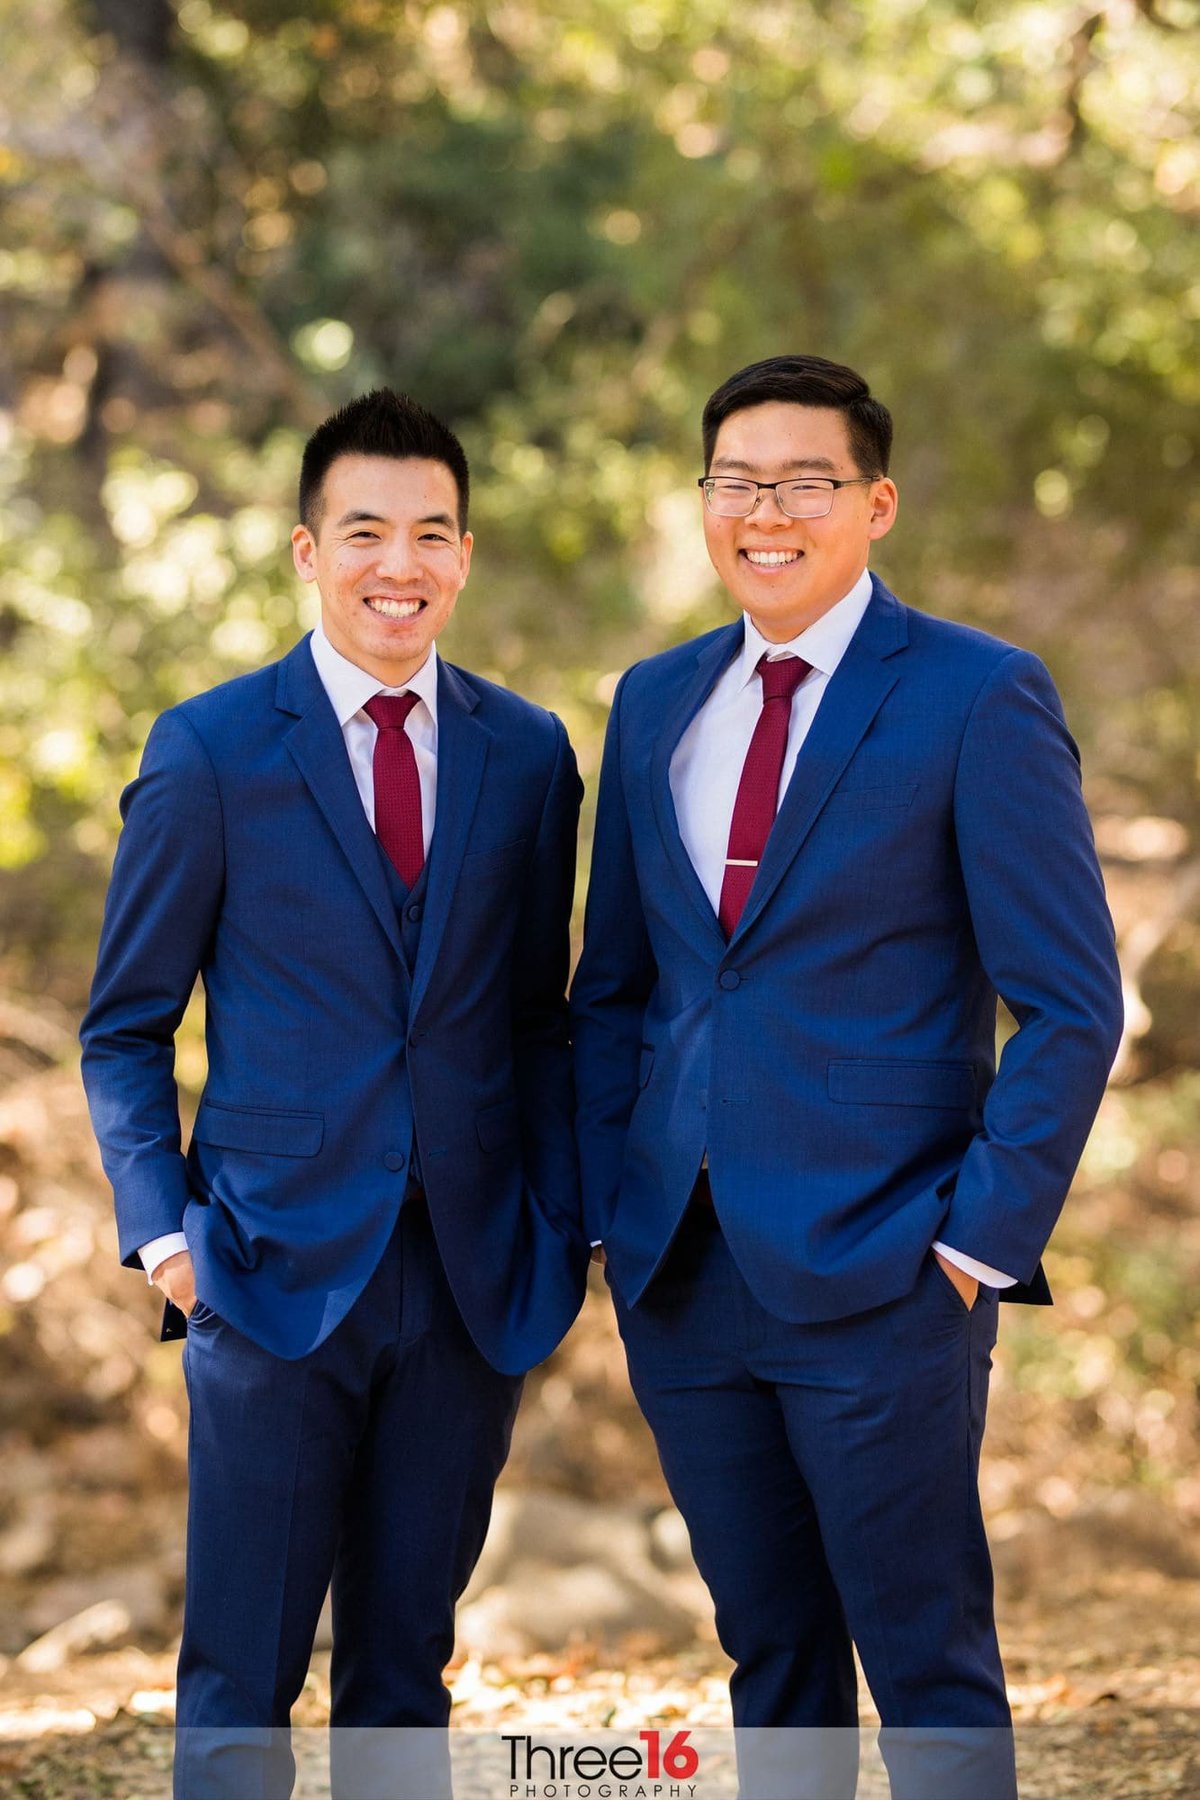 Groom and his Best Man pose together in their blue suits